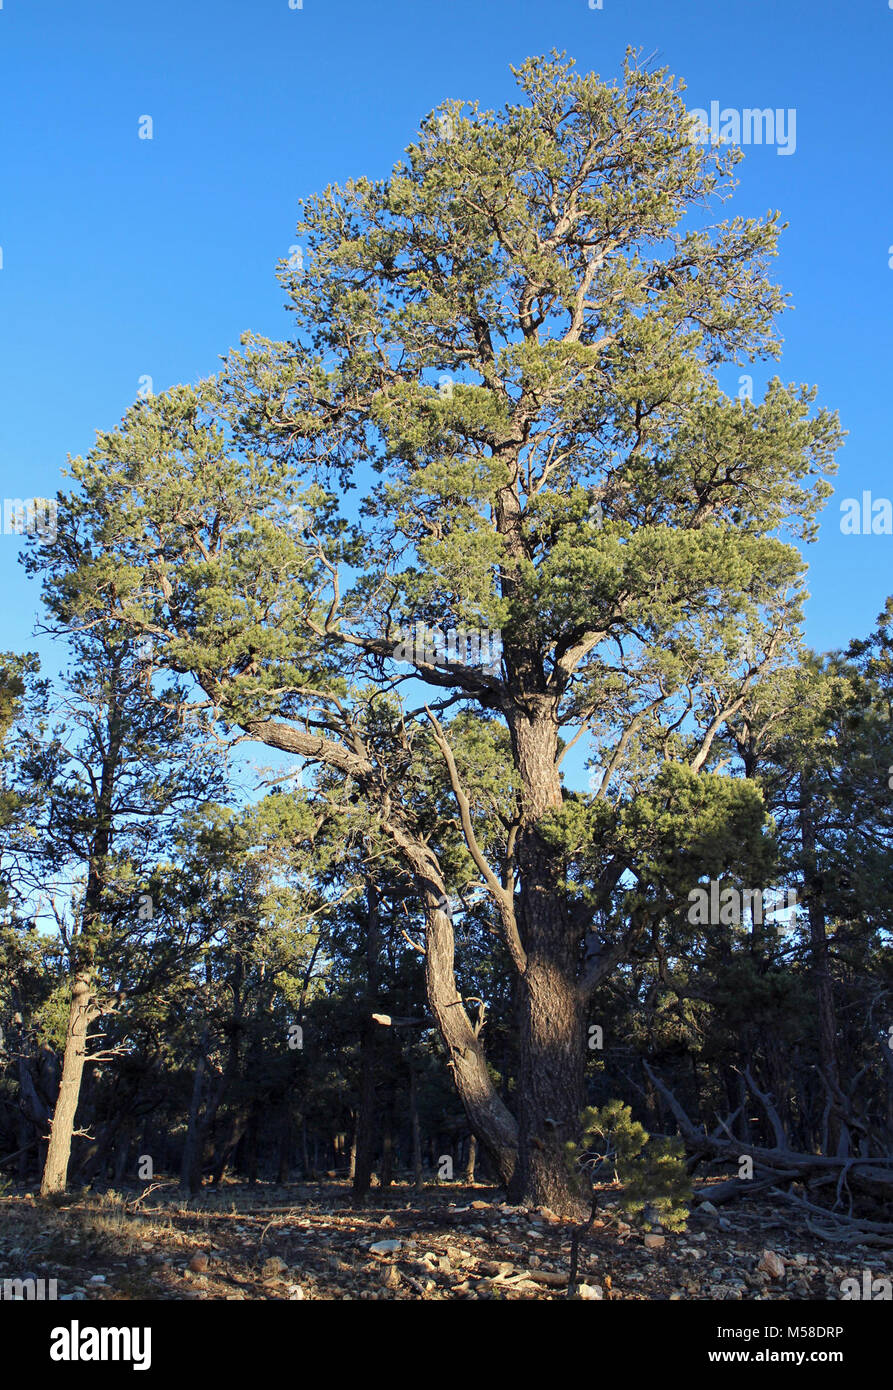 Pinyon Pines (Pinus edulis) in South Rim forest Grand Canyon. Pinyon pines (Pinus edulis) have crooked trunks, reddish bark and are very slow growing. Most tend to be short and scrubby, but under the right conditions, they may reach a height of 35 feet (10 m).  Trees 4 to 6 inches (10 to 15 cm) in diameter may be 80 to 100 years old.  NPS Stock Photo